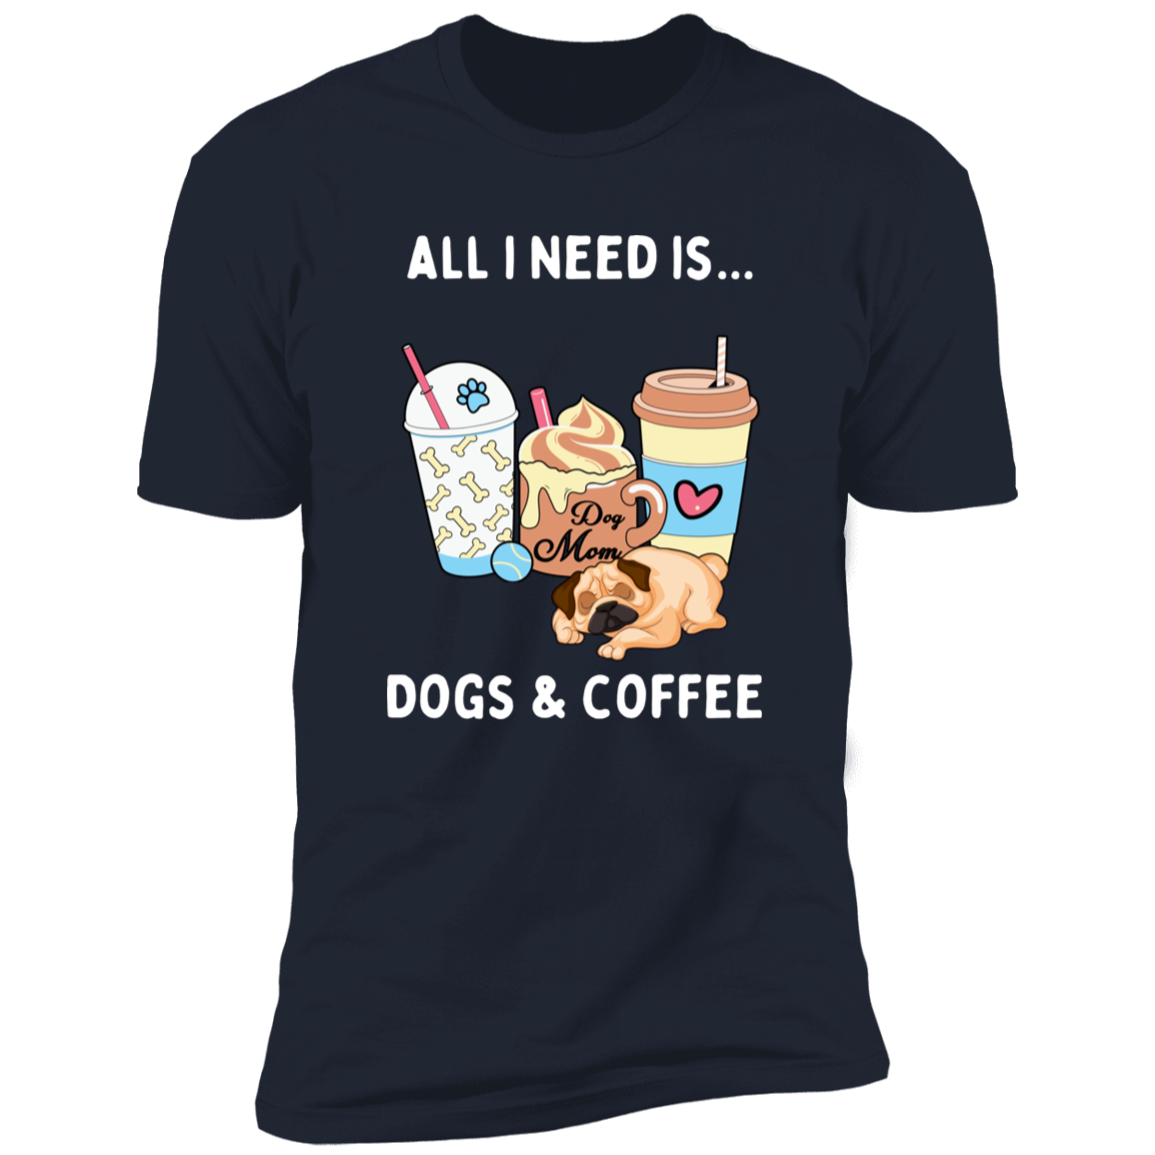 All I Need is Dogs and Coffee, Dog shirt for humas, in navy blue